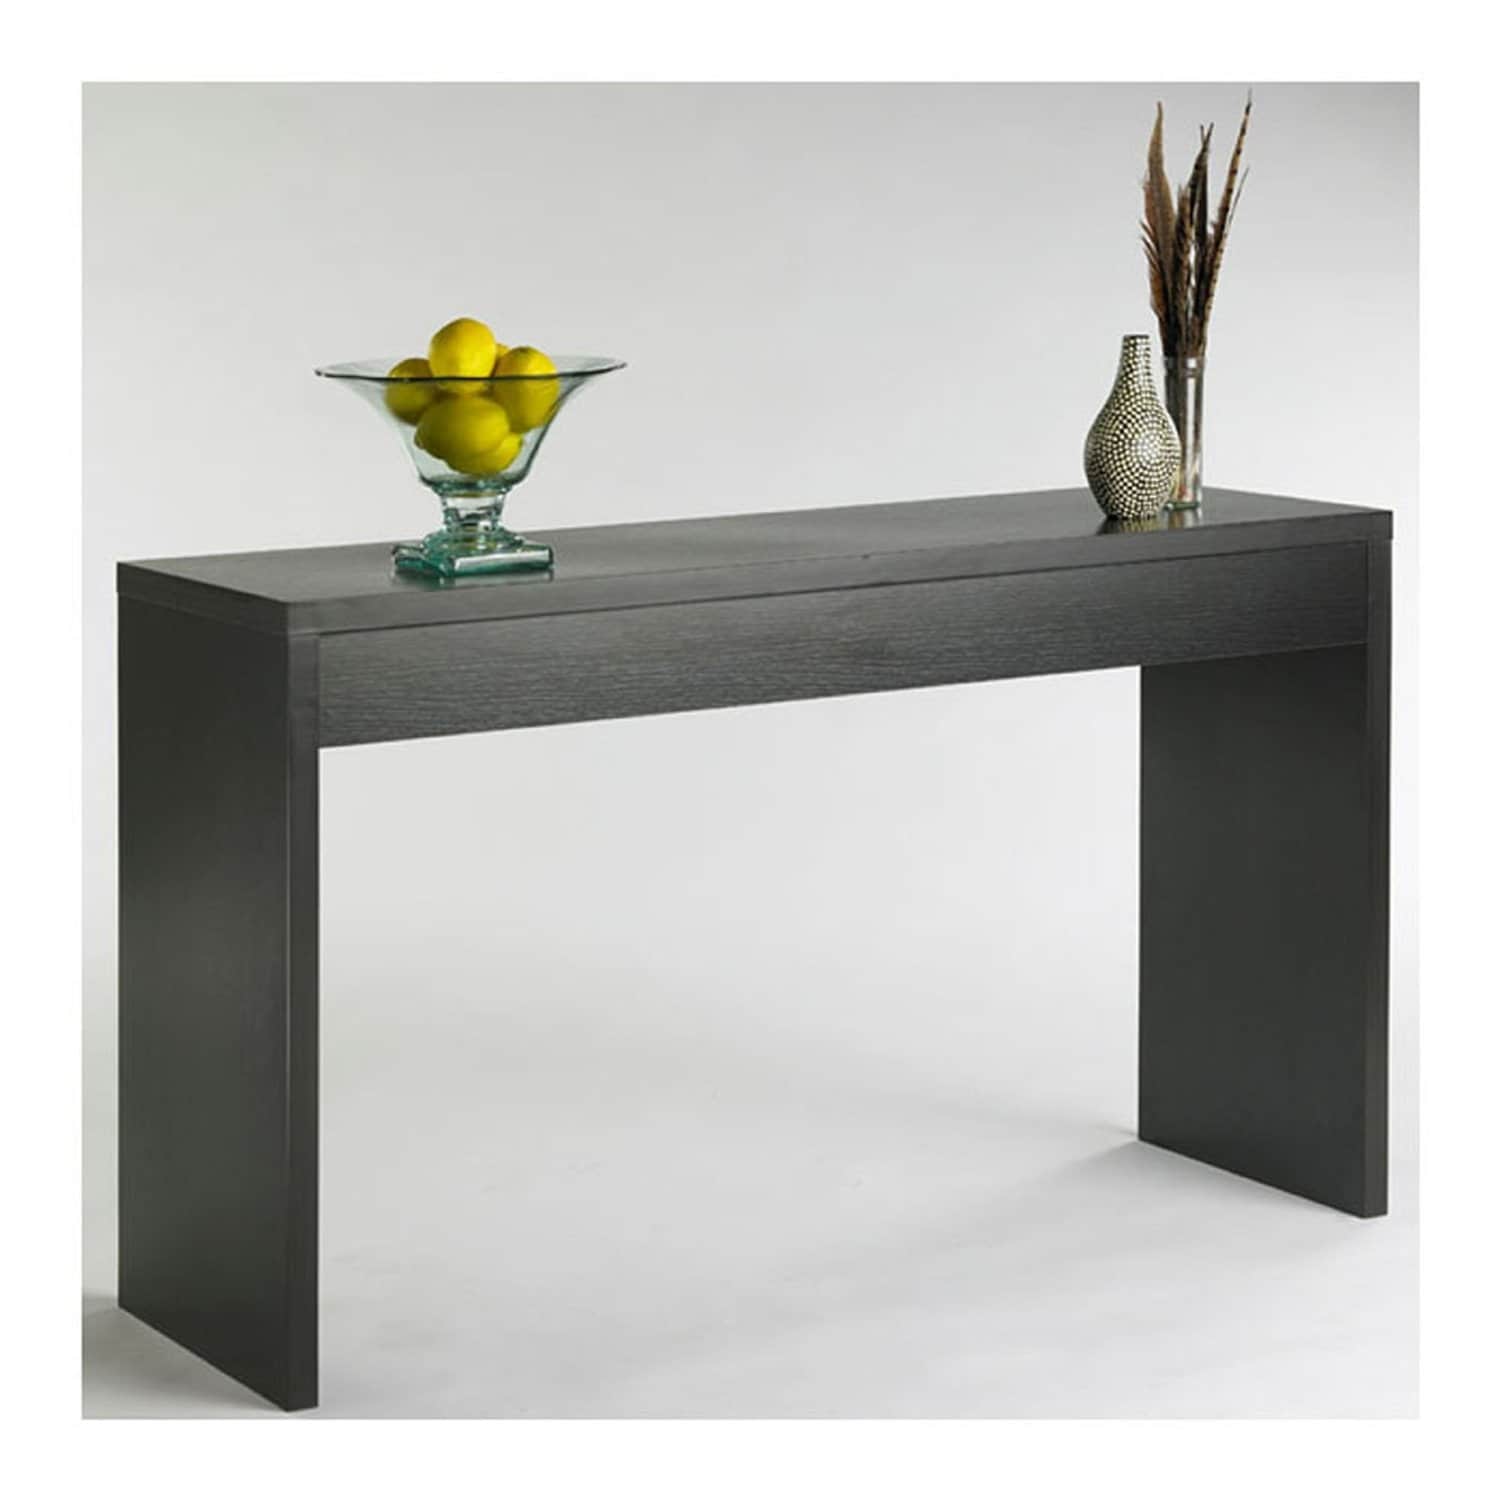 Contemporary Living Room Console Wall Sofa Table In Espresso Pictured Overstock 29063567